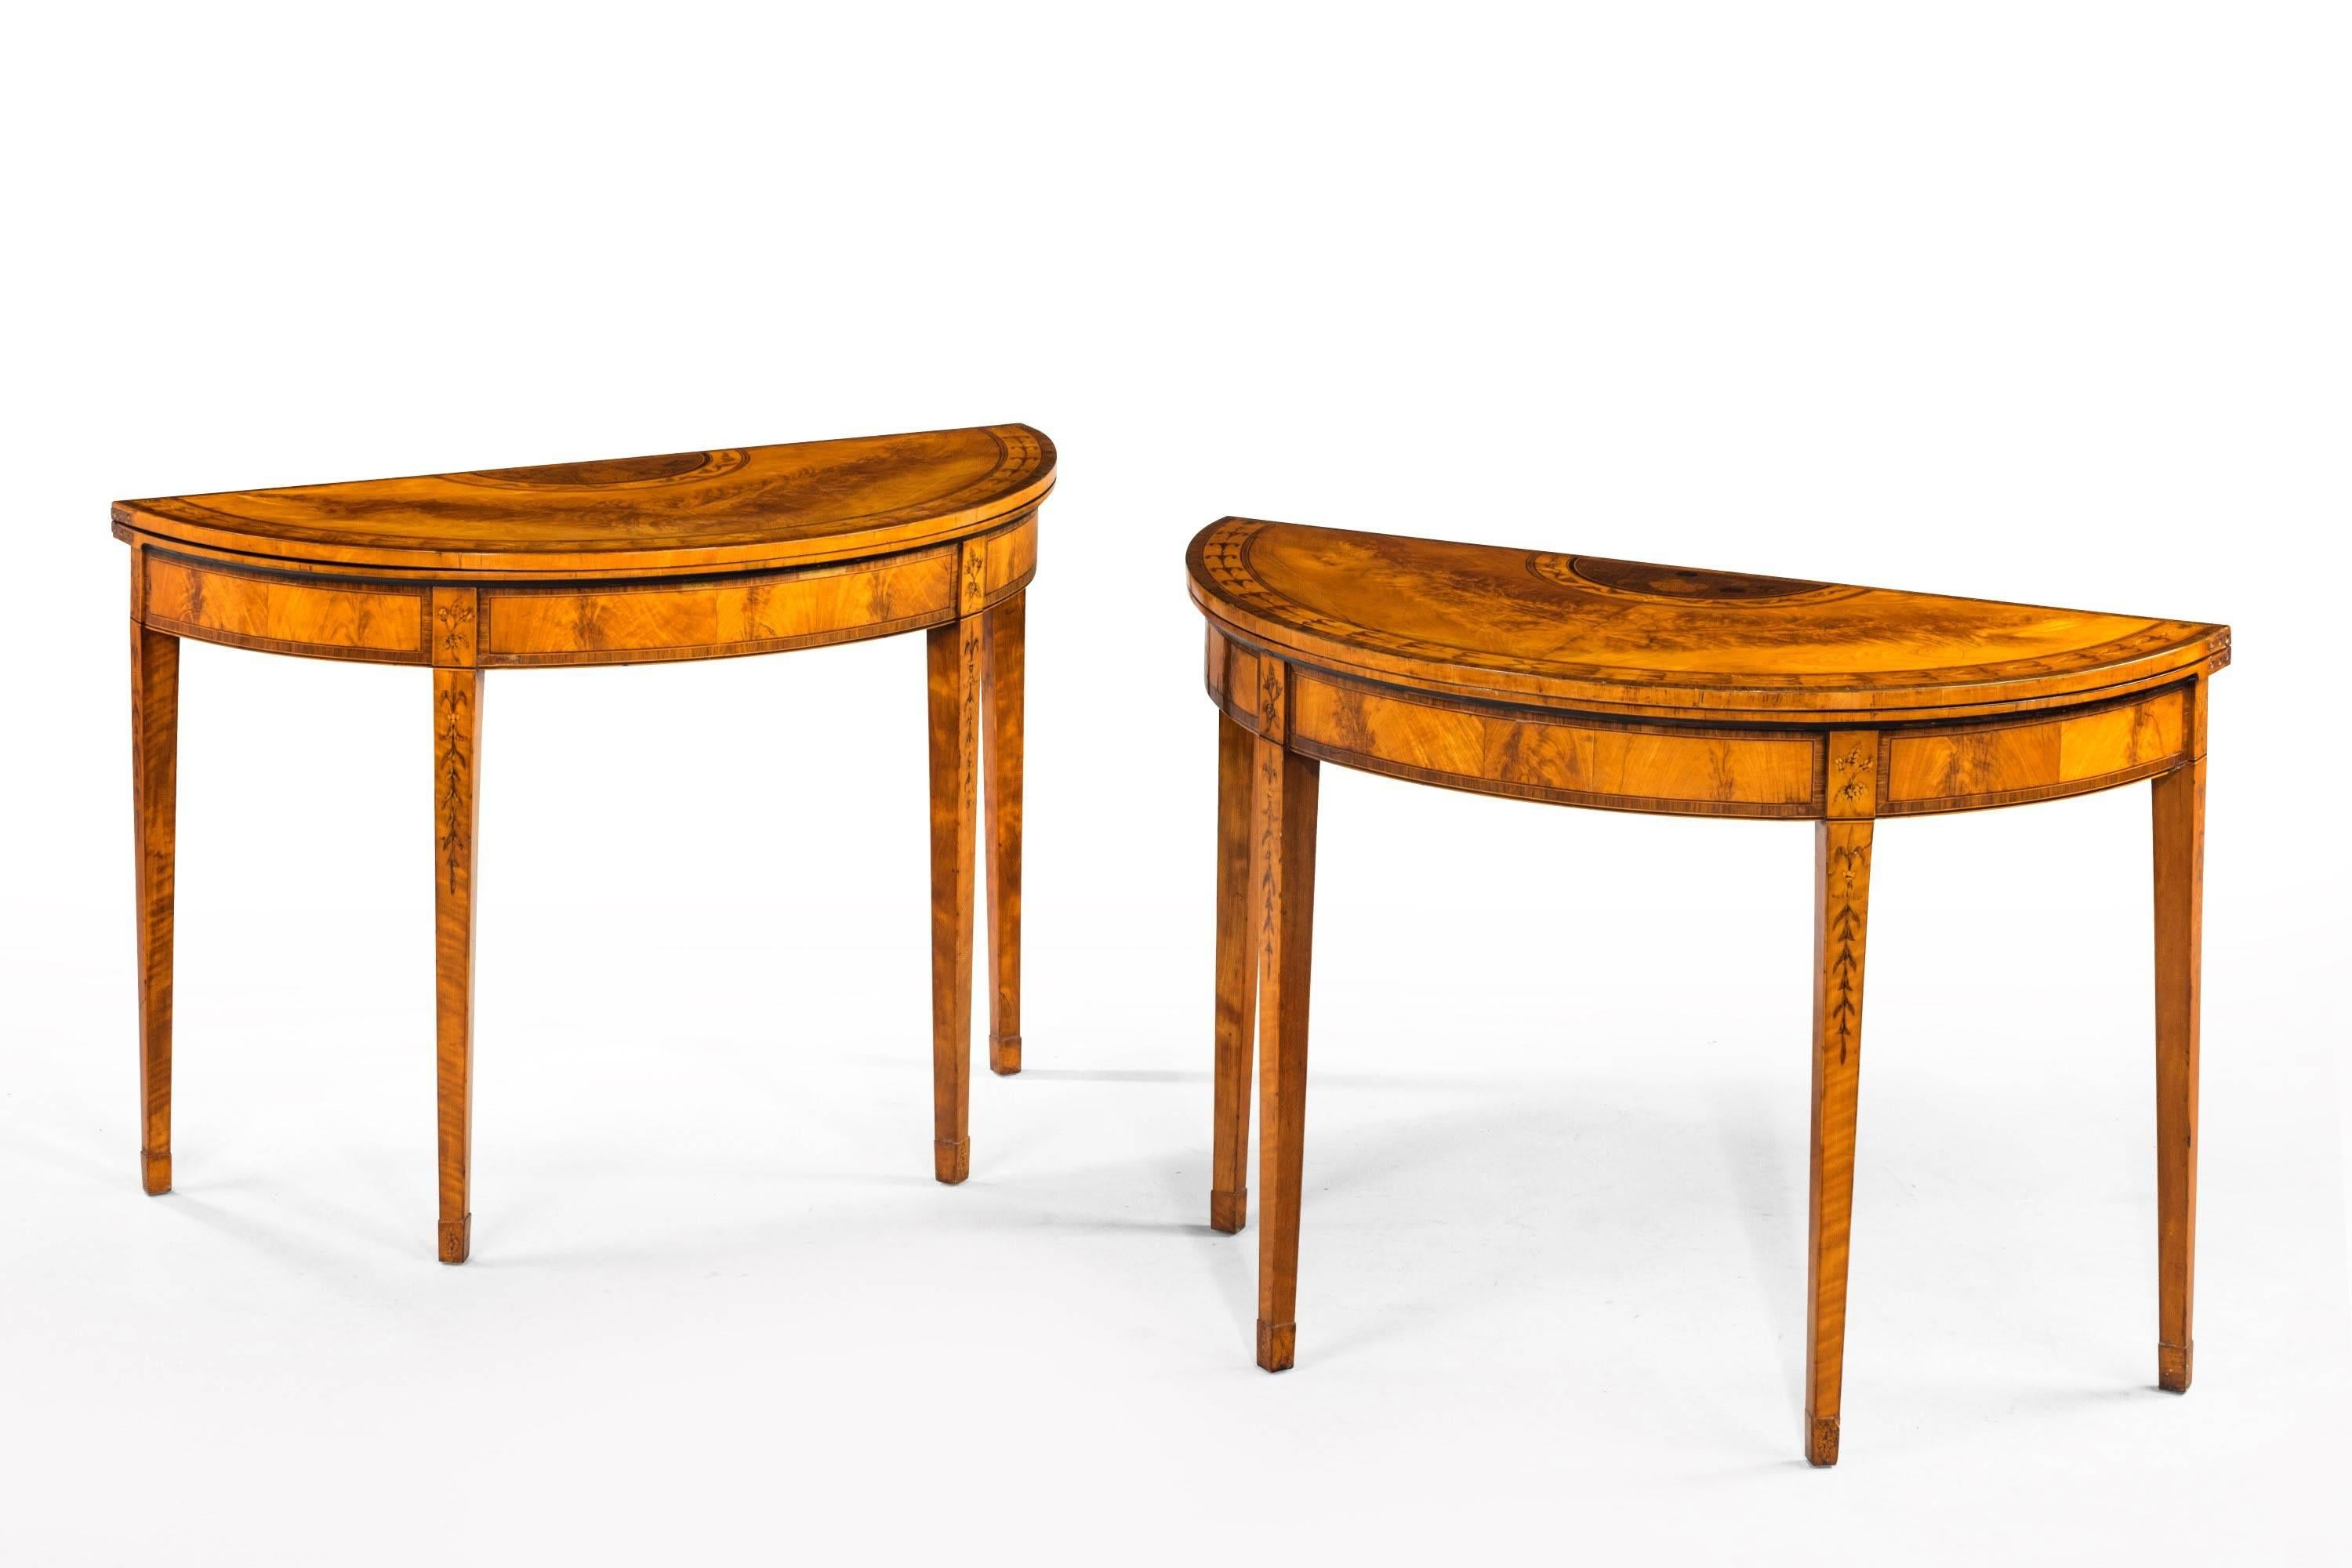 English Pair of George III Period Satinwood Card Tables with Harebell and Leaf Decoratio